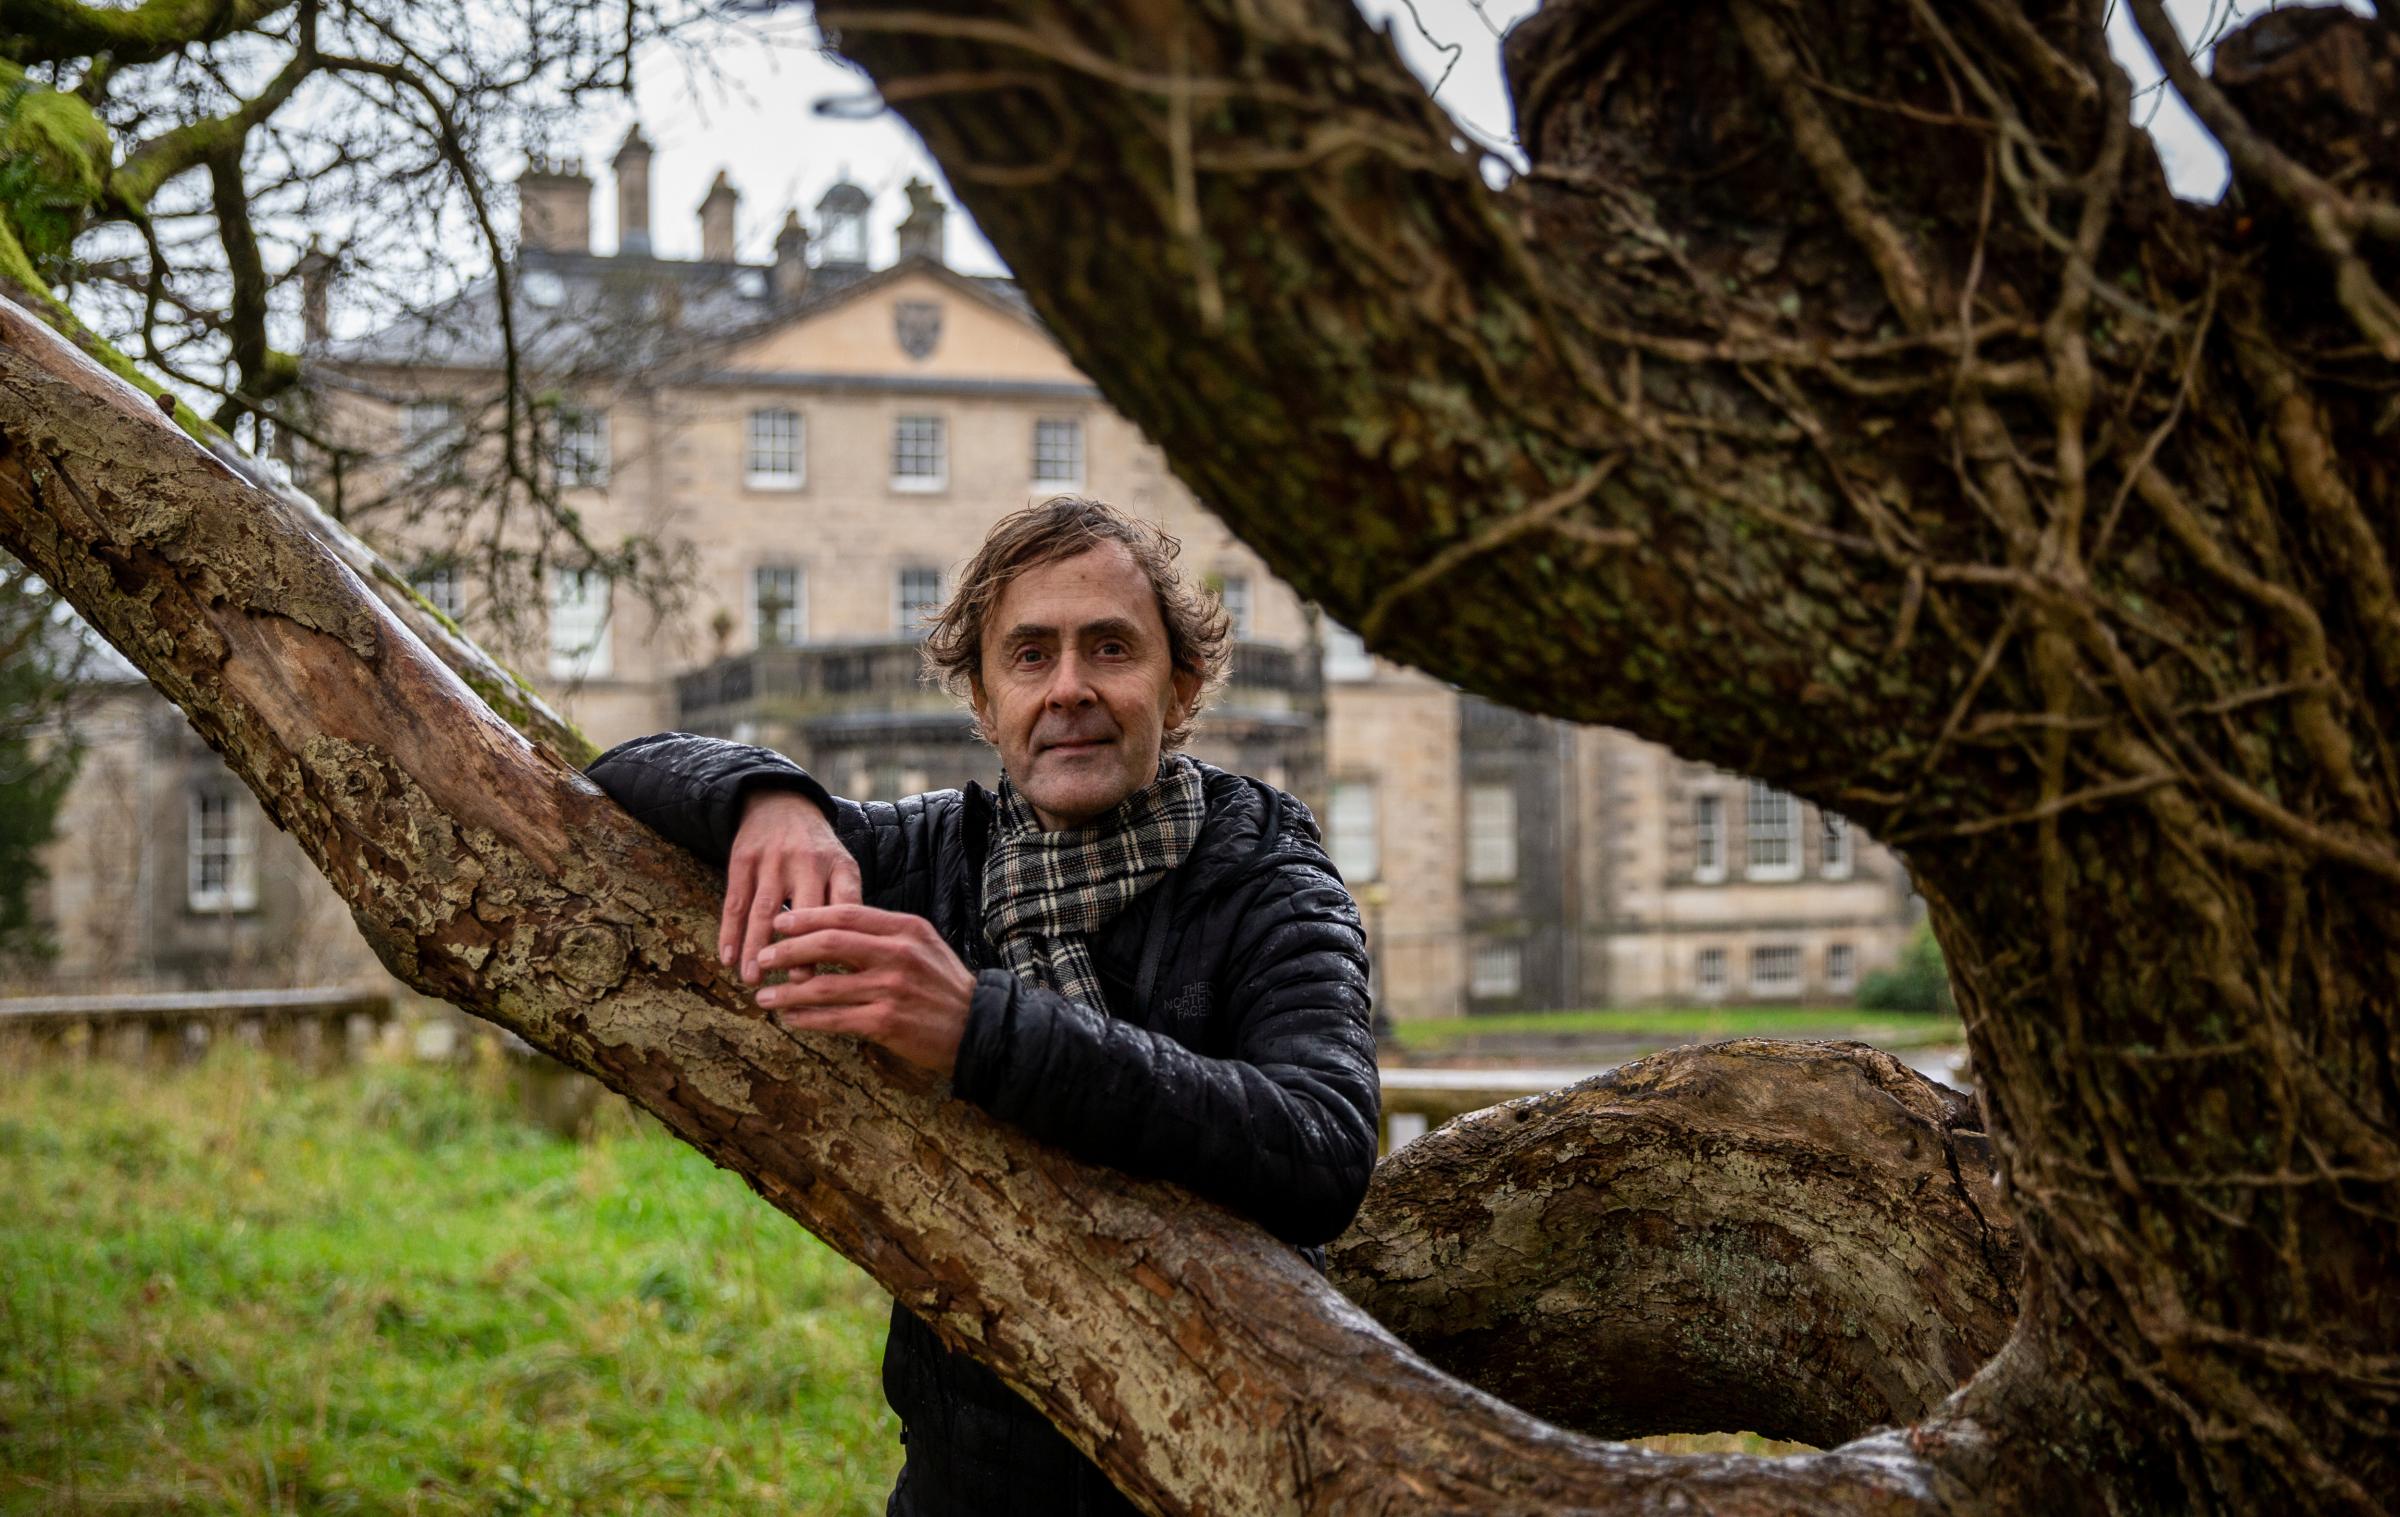 Artist Alec Finlay pictured in front of Pollok House at Pollok Country Park, Glasgow...Photograph by Colin Mearns.16 November 2021.For The Herald, see story by Deborah Anderson.